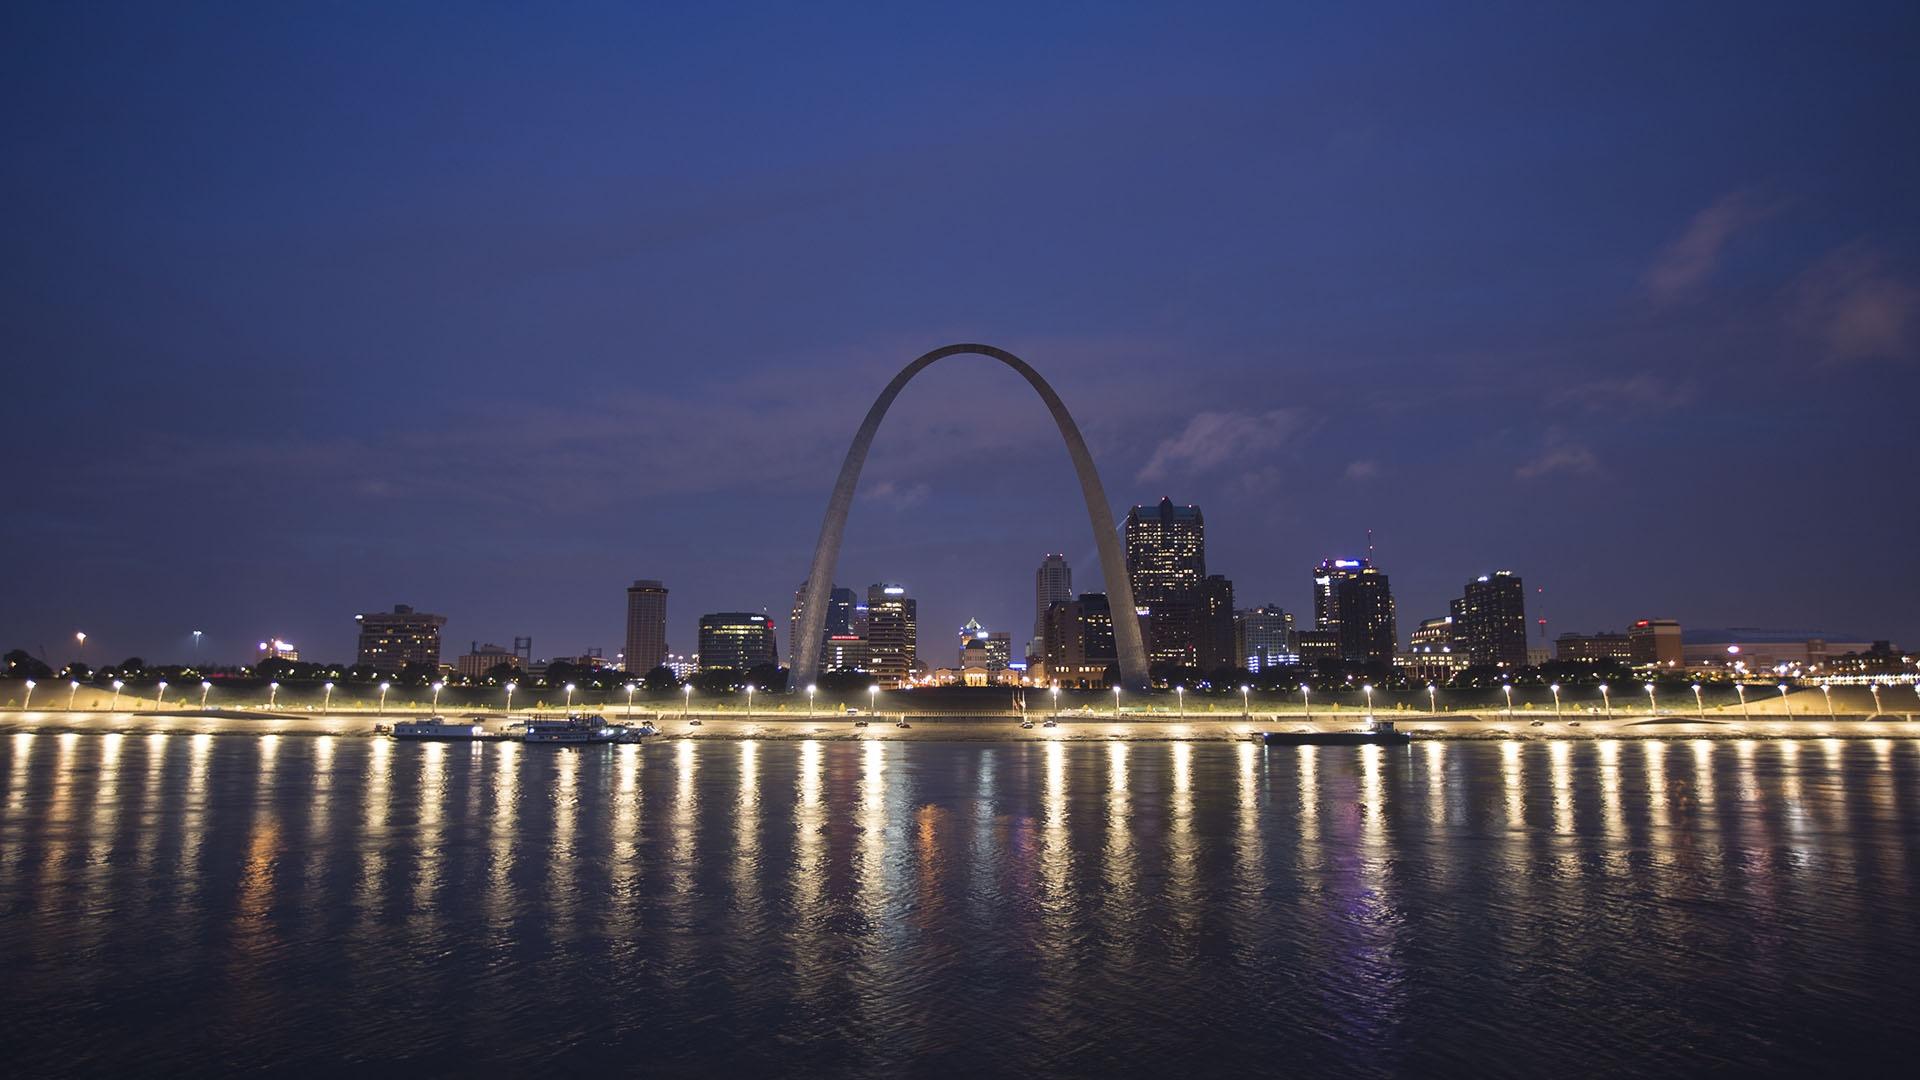 A view of St. Louis at night.